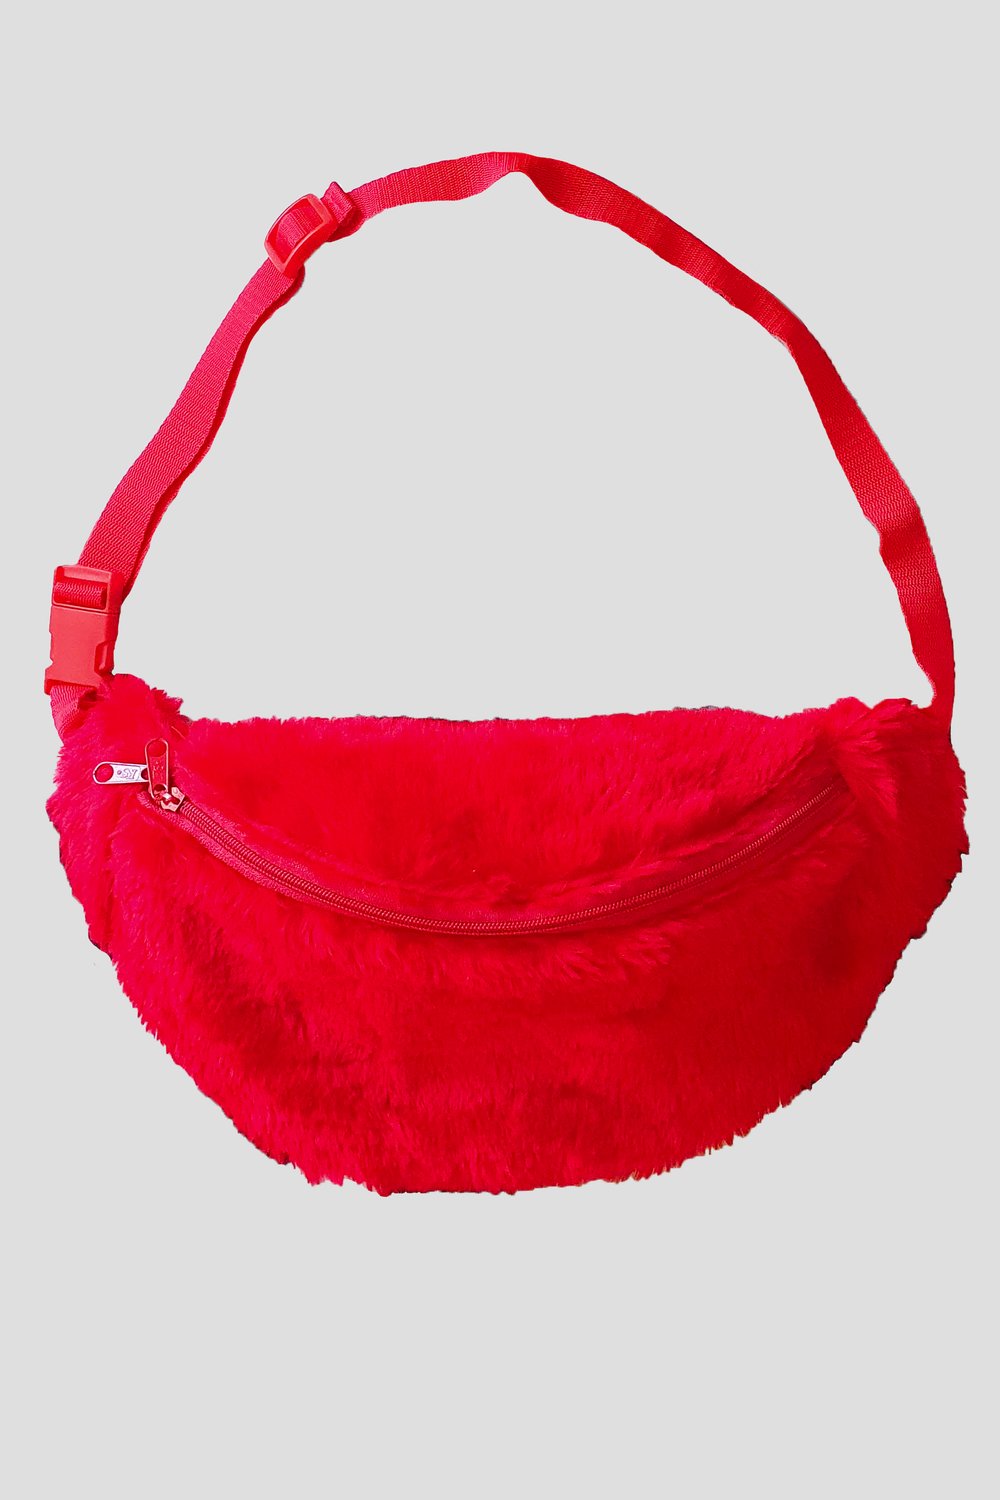 Image of Red Fluffy fanny pack